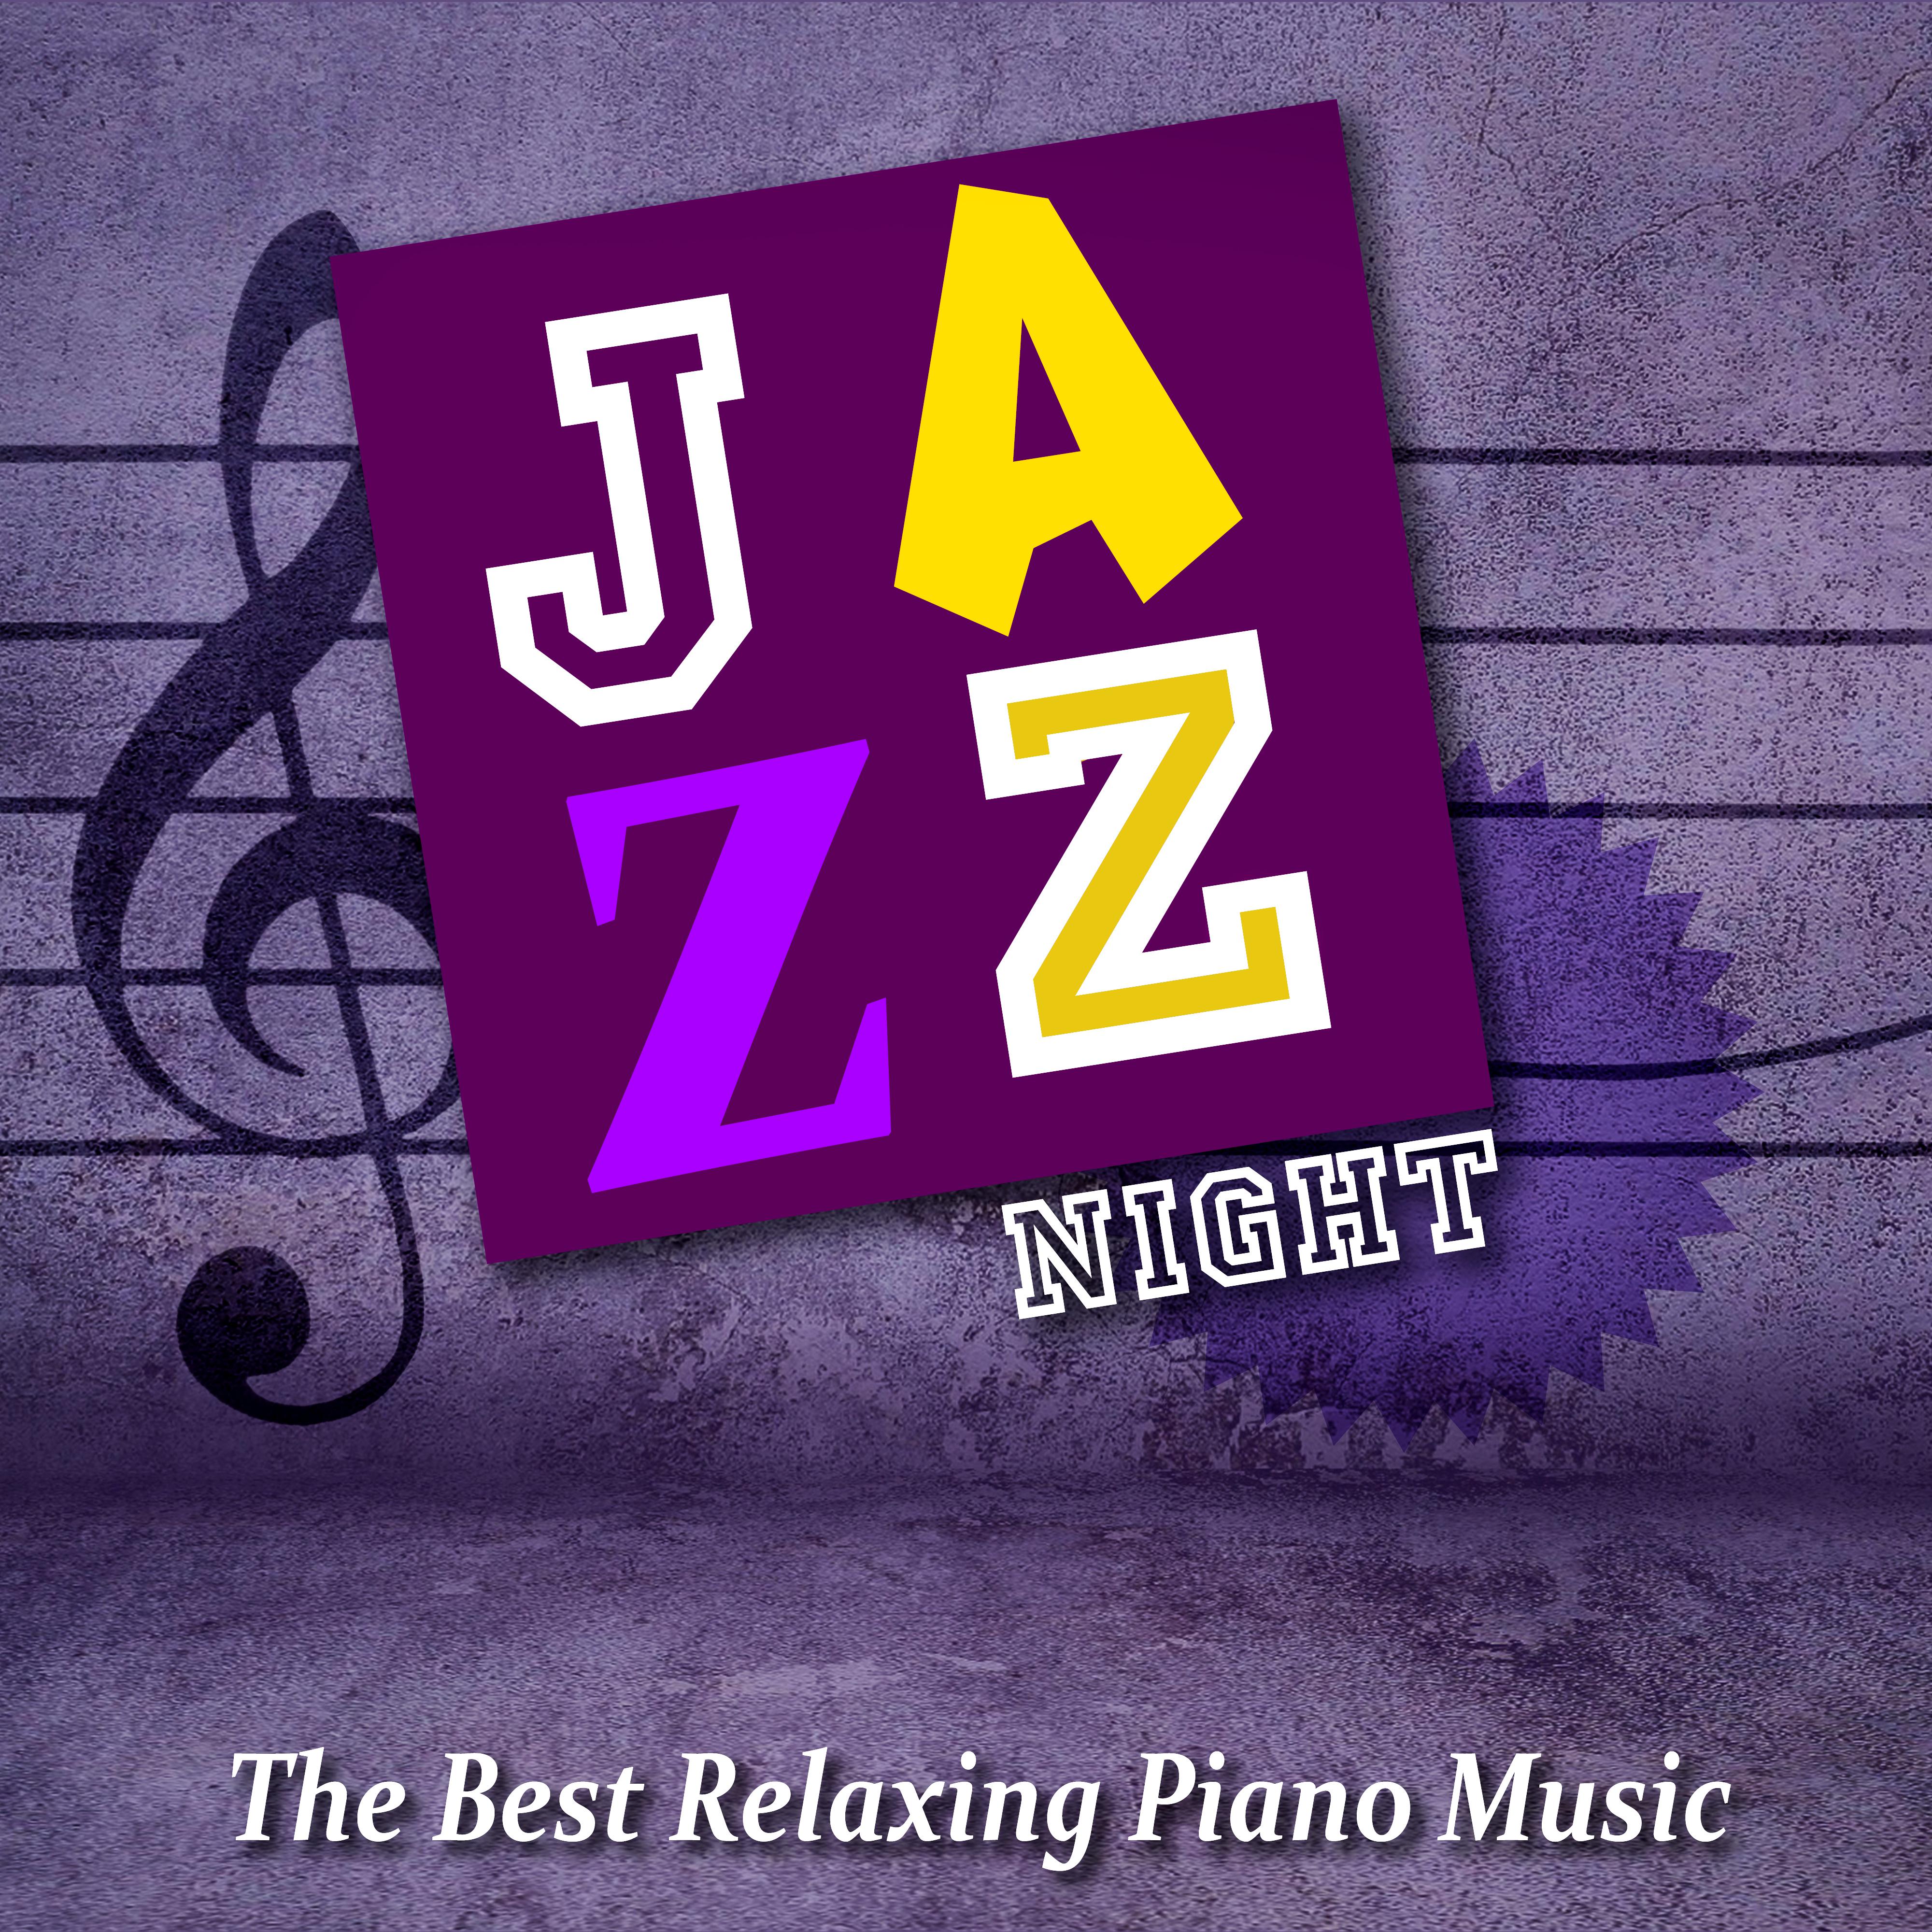 Jazz Night - The Best Relaxing Piano Music, Jazz Lounge, Easy Listening & Relax, Soft Instrumental Music